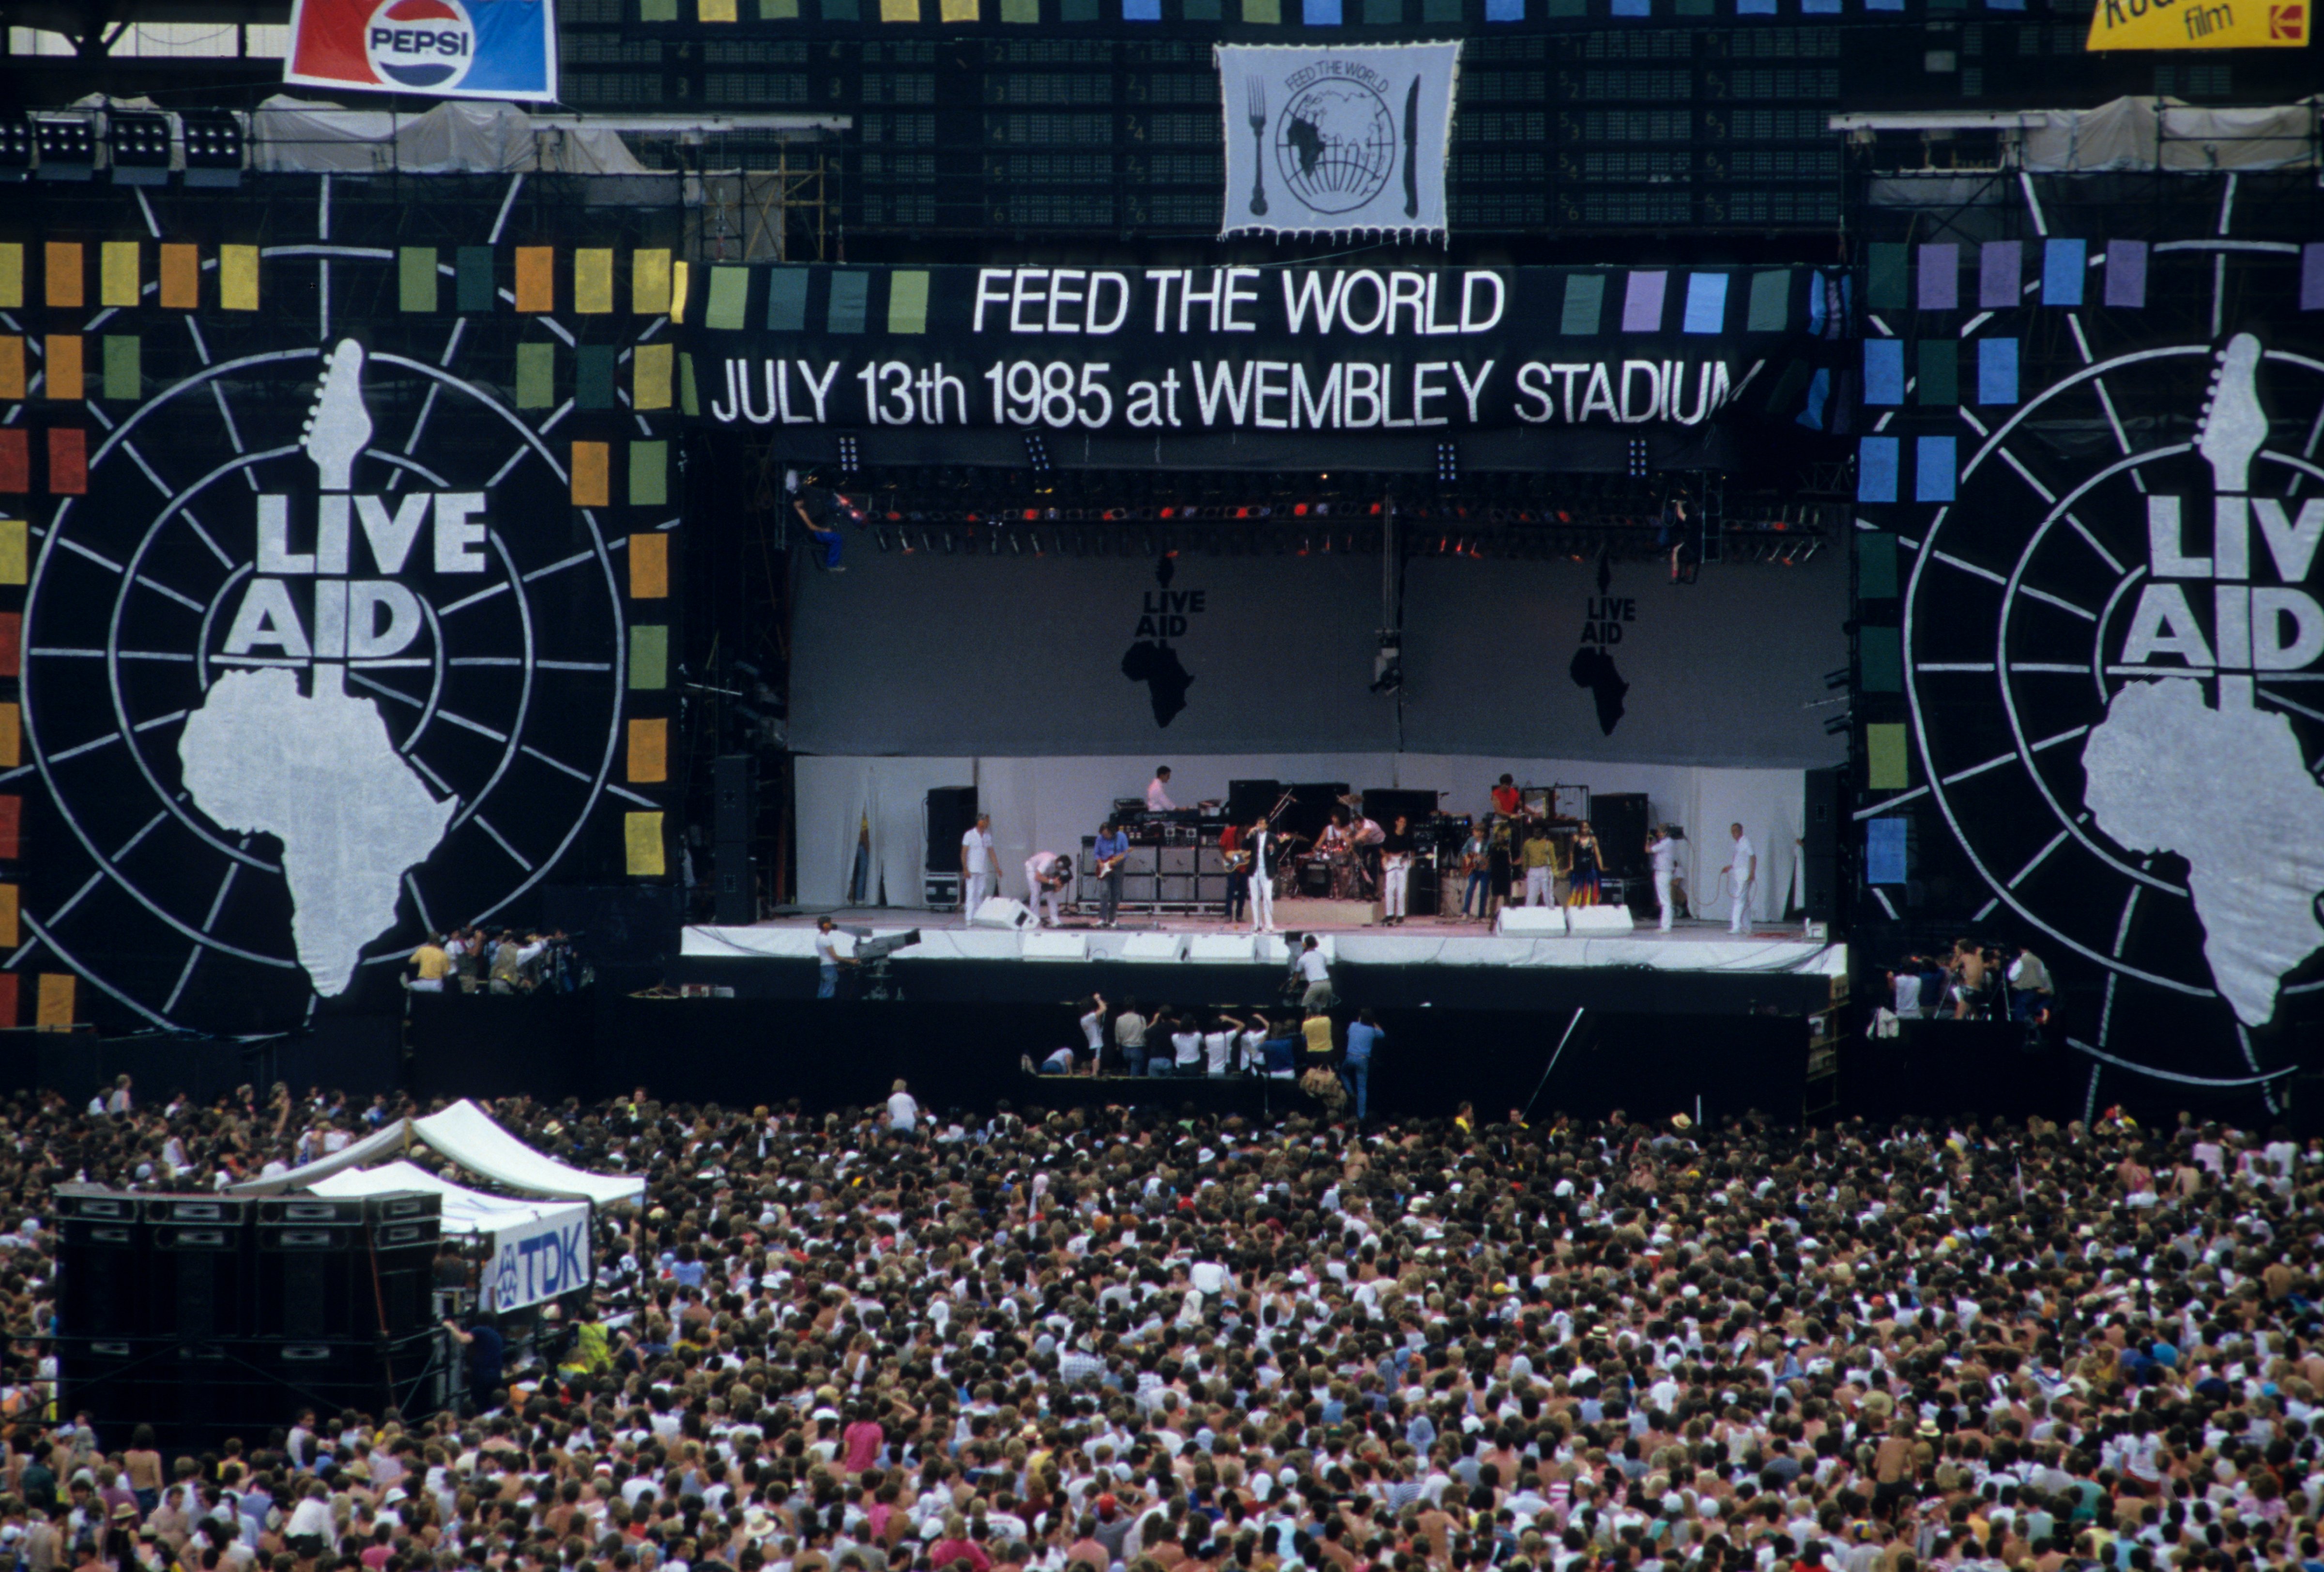 A general view of the crowd and the stage during the Live Aid concert at Wembley Stadium in London on July 13, 1985 (Georges De Keerle—Getty Images)